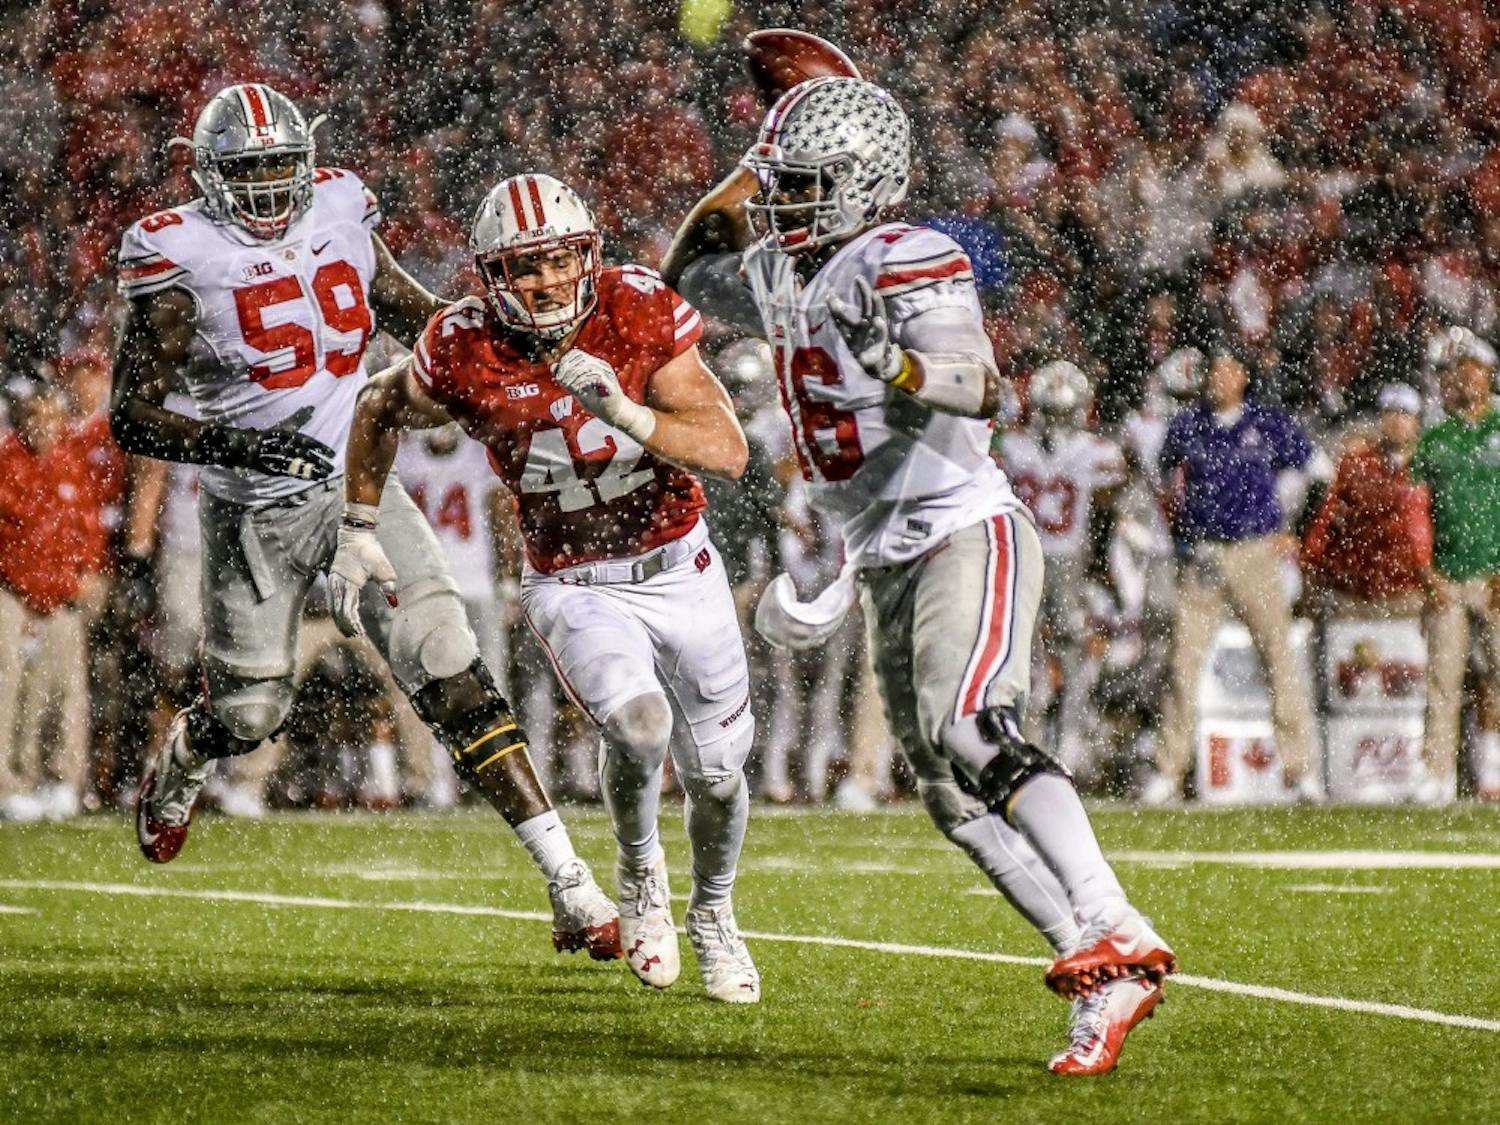 Ohio State came up with a huge win over Penn State last week after a major fourth quarter comeback.